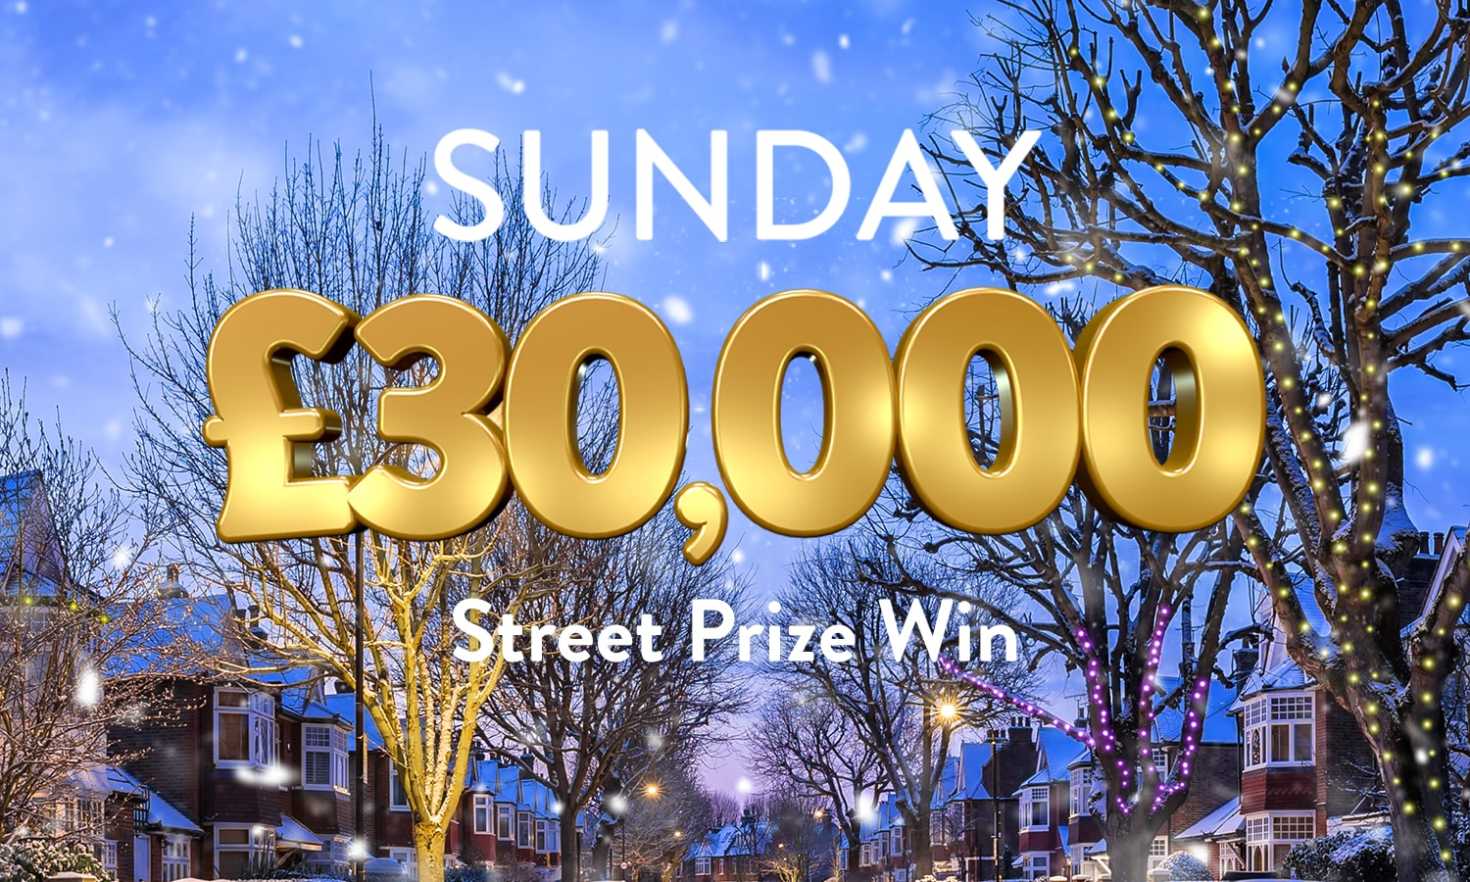 Every ticket in a lucky postcode wins £30,000 in Sunday's Street Prize